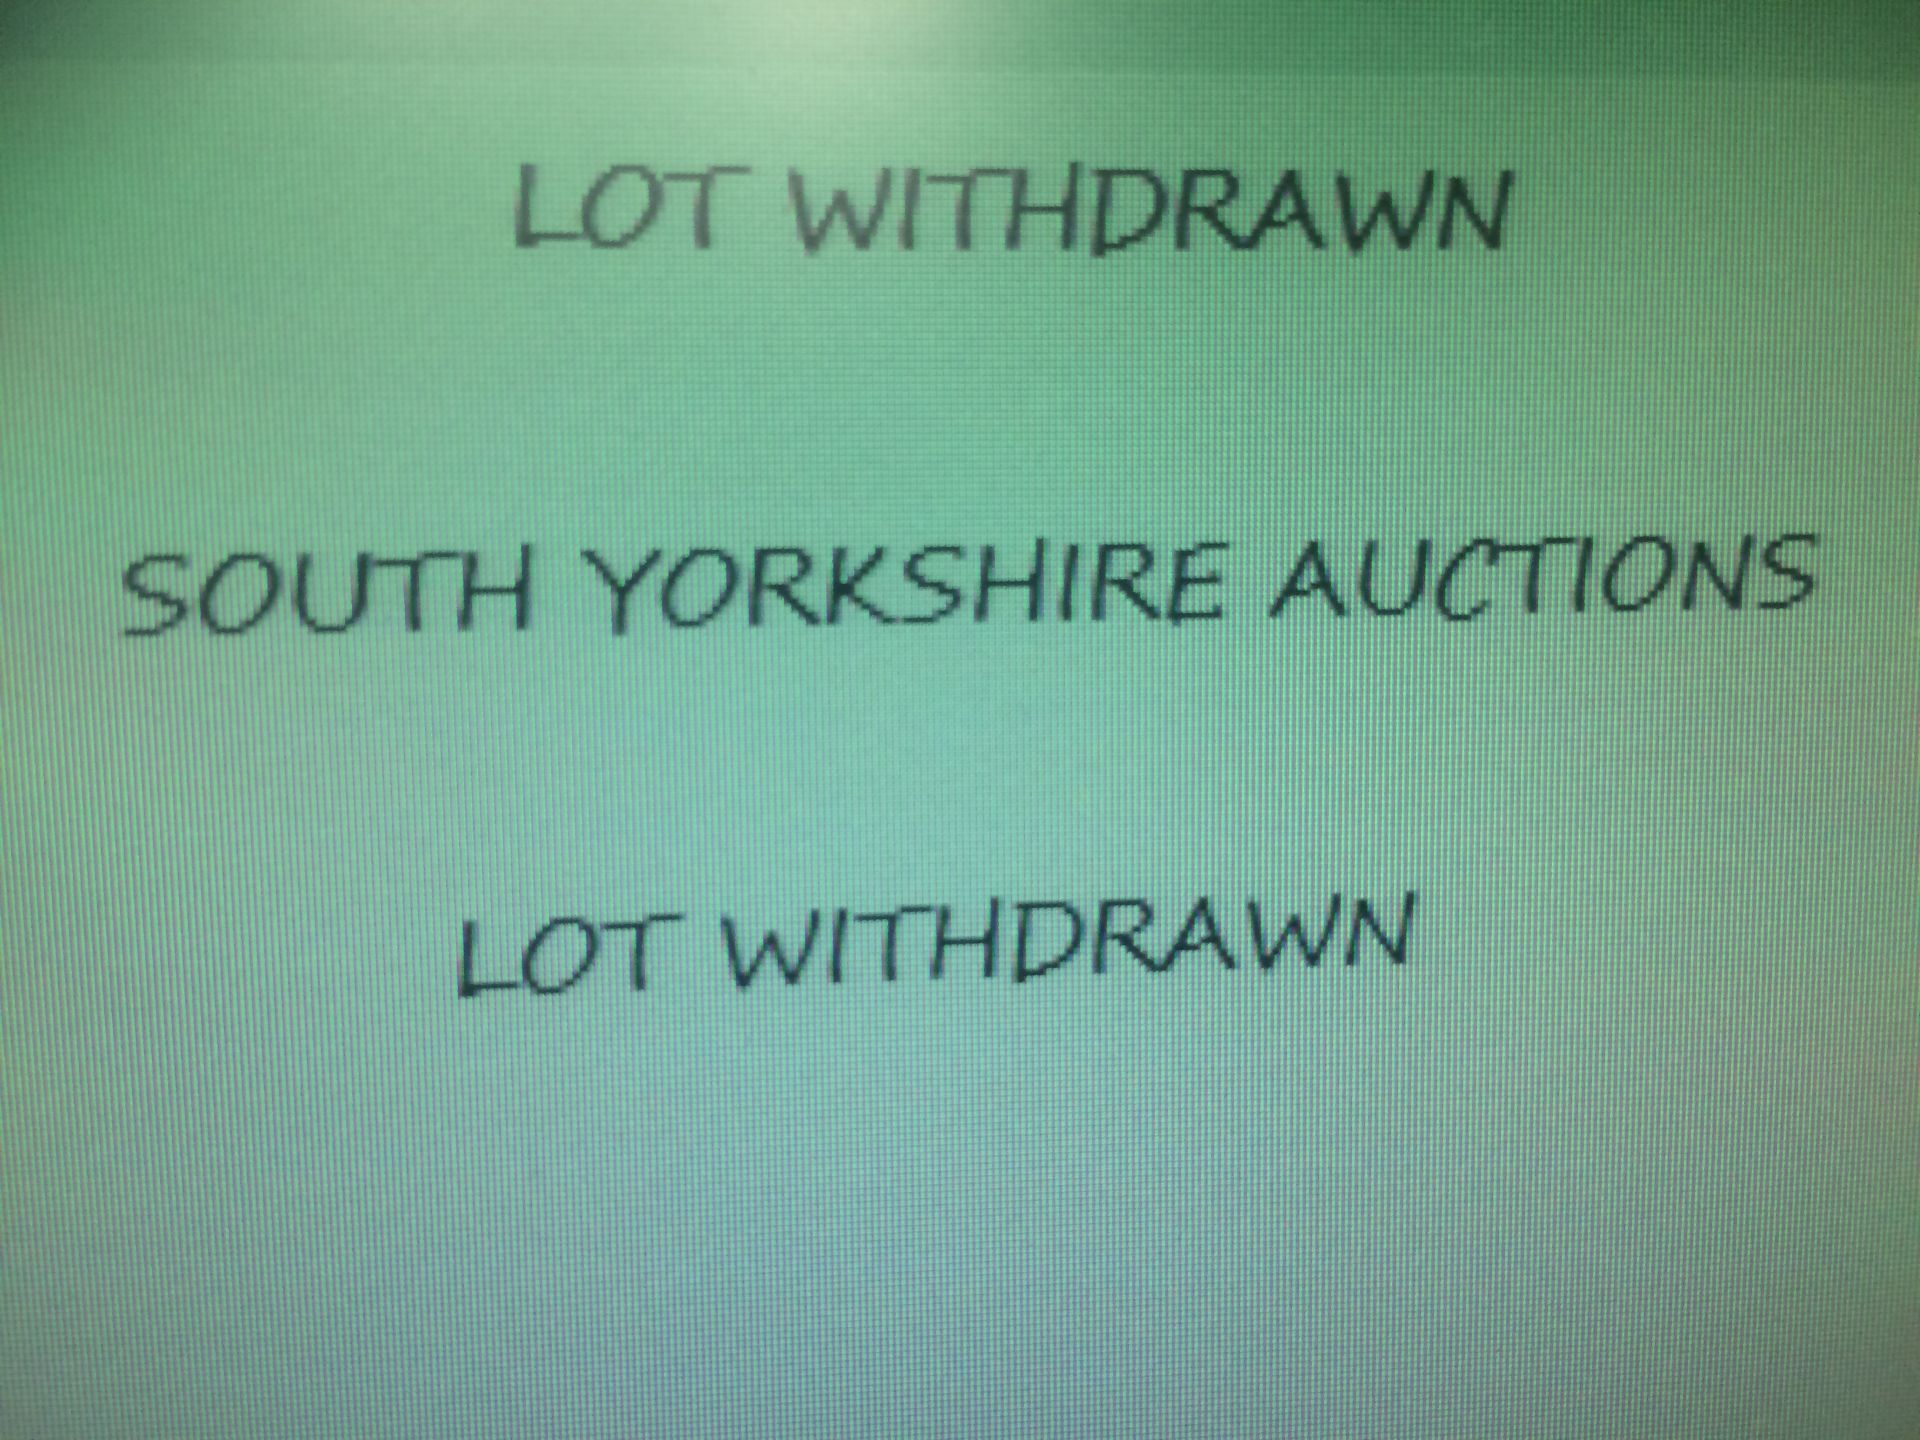 LOT WITHDRAWN DO NOT BID ON THIS ITEM